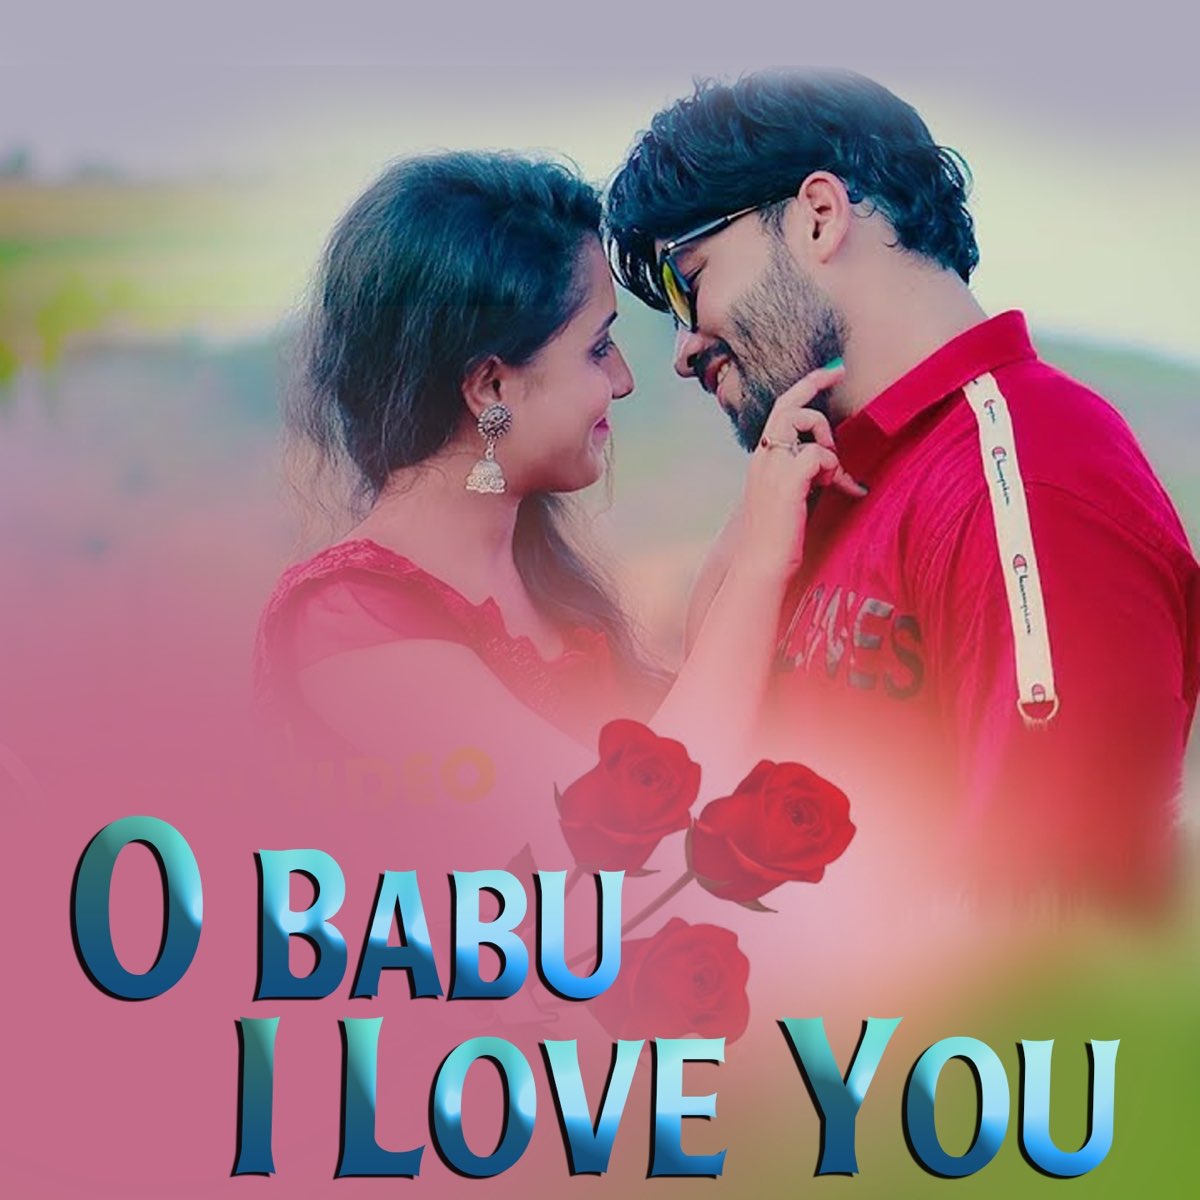 Top 999+ i love you babu images – Amazing Collection i love you babu images Full 4K